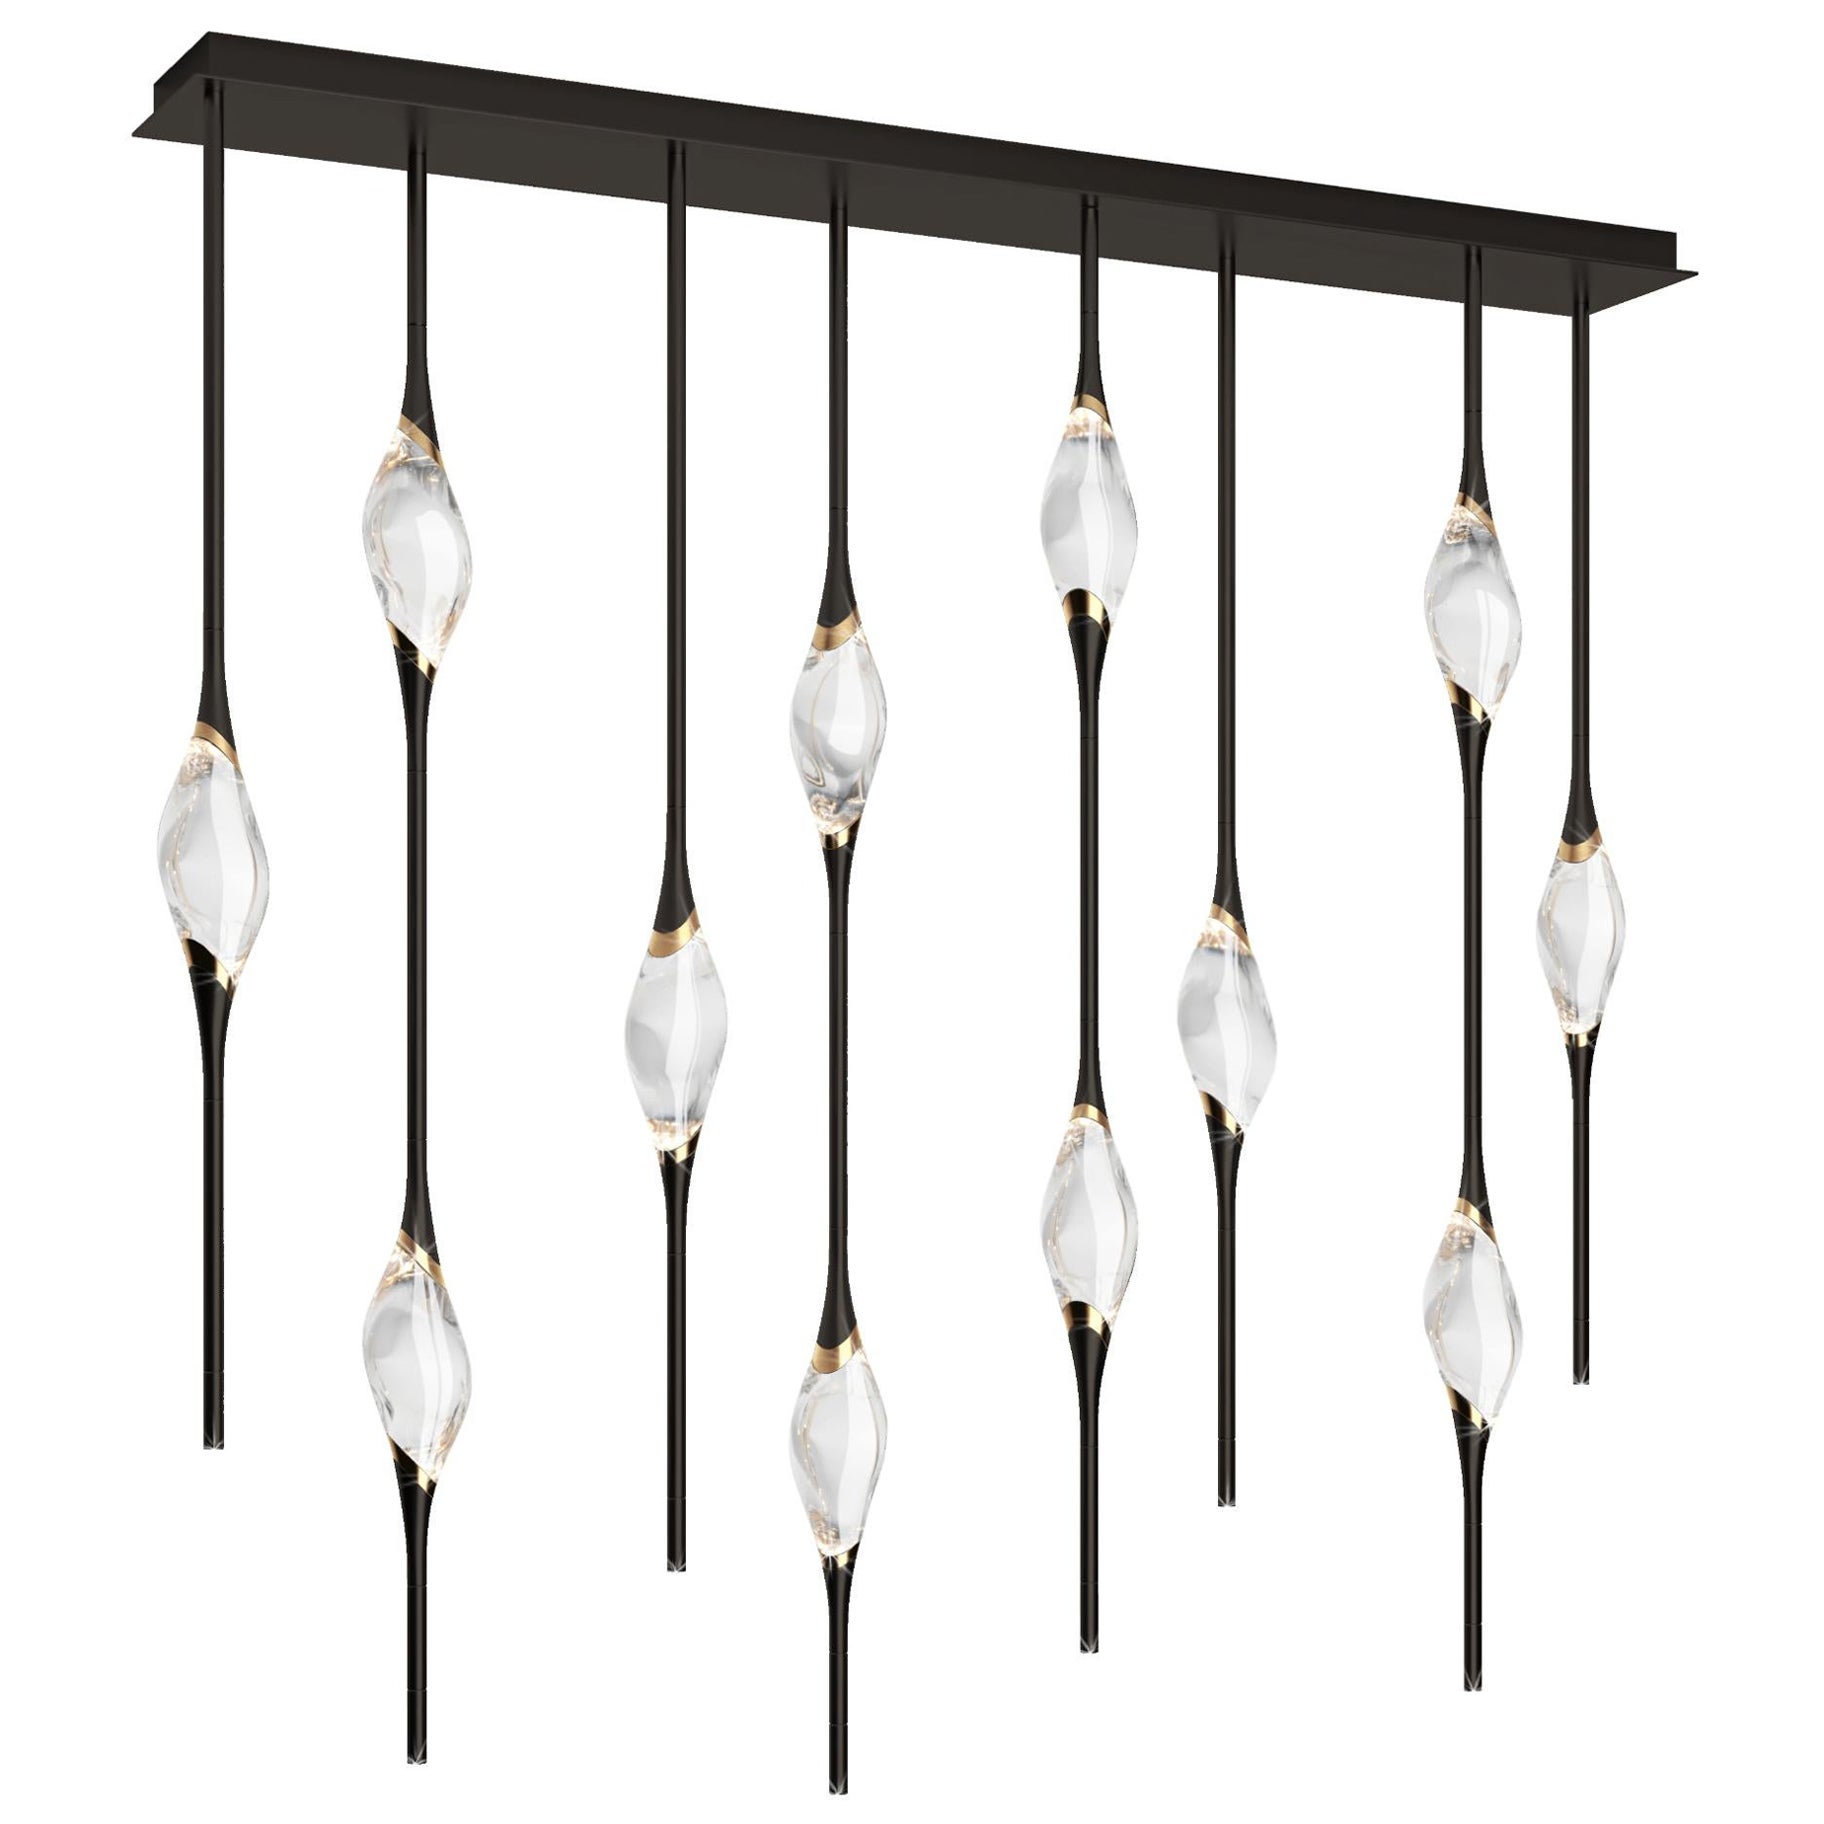 "Il Pezzo 12 Staggered Chandelier" - length 150cm/59” - black and polished brass For Sale